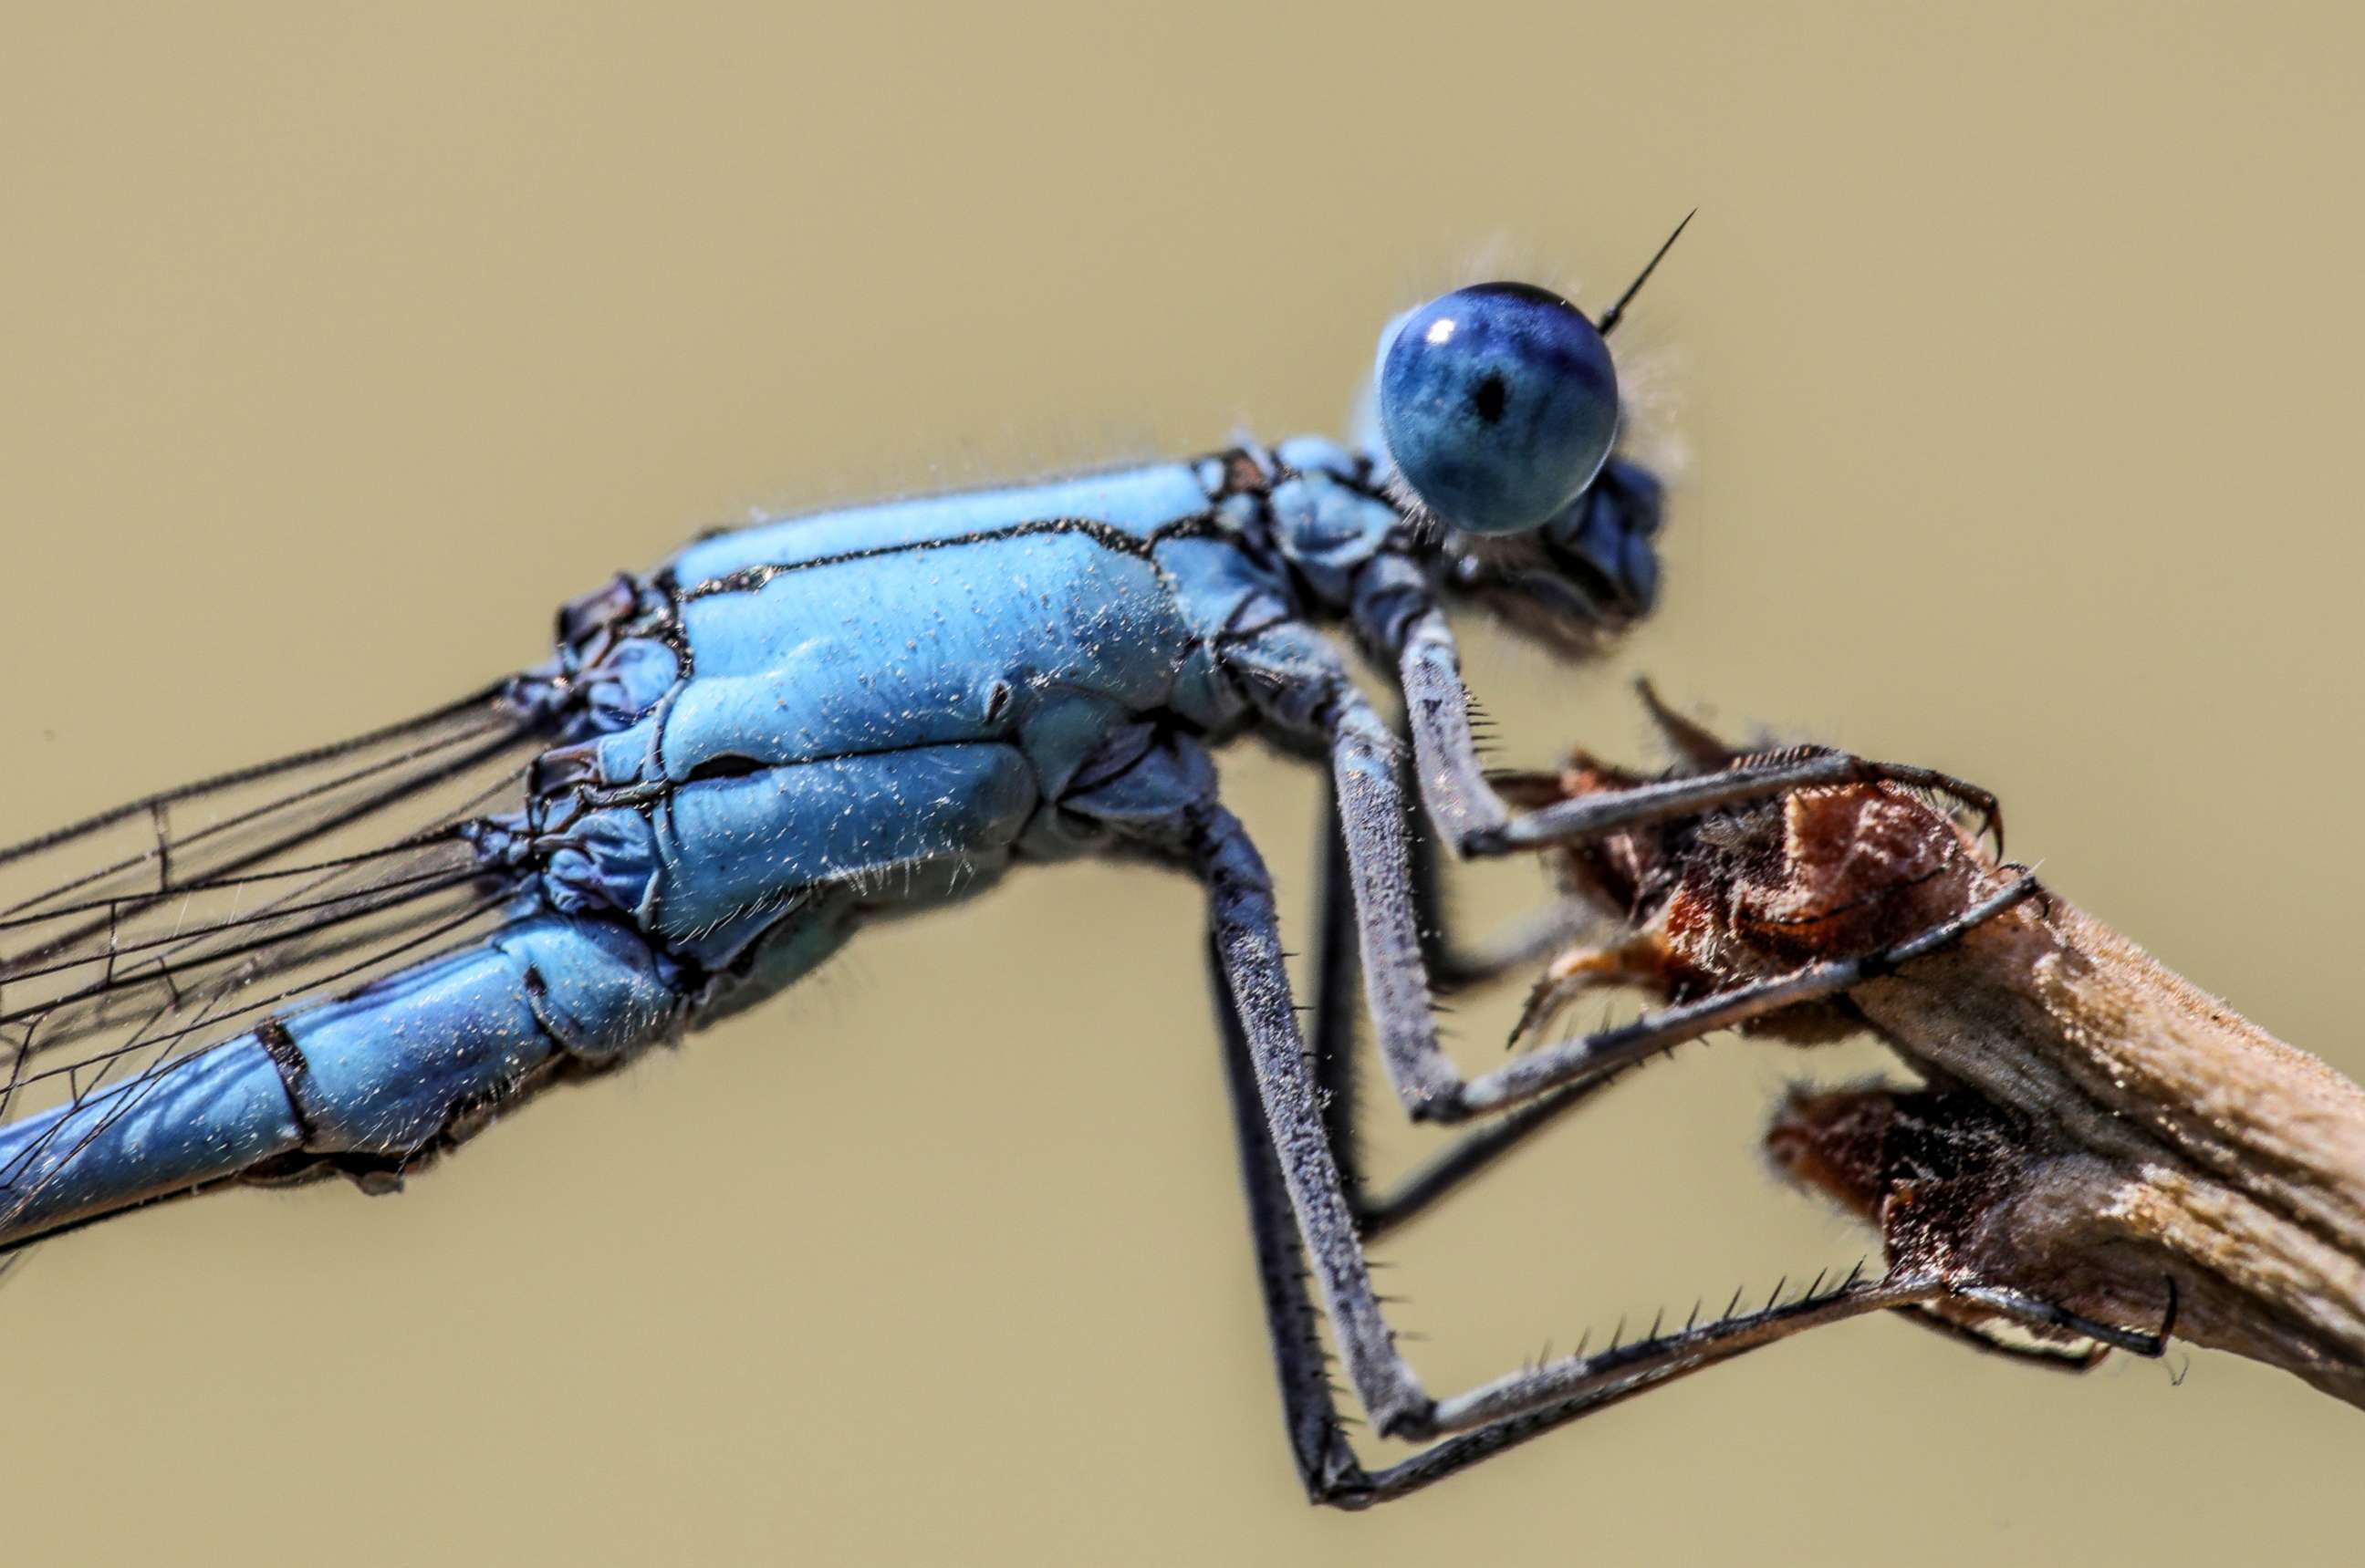 PHOTO: A dragonfly feeds on a mosquito at Gevas district in Van, Turkey.